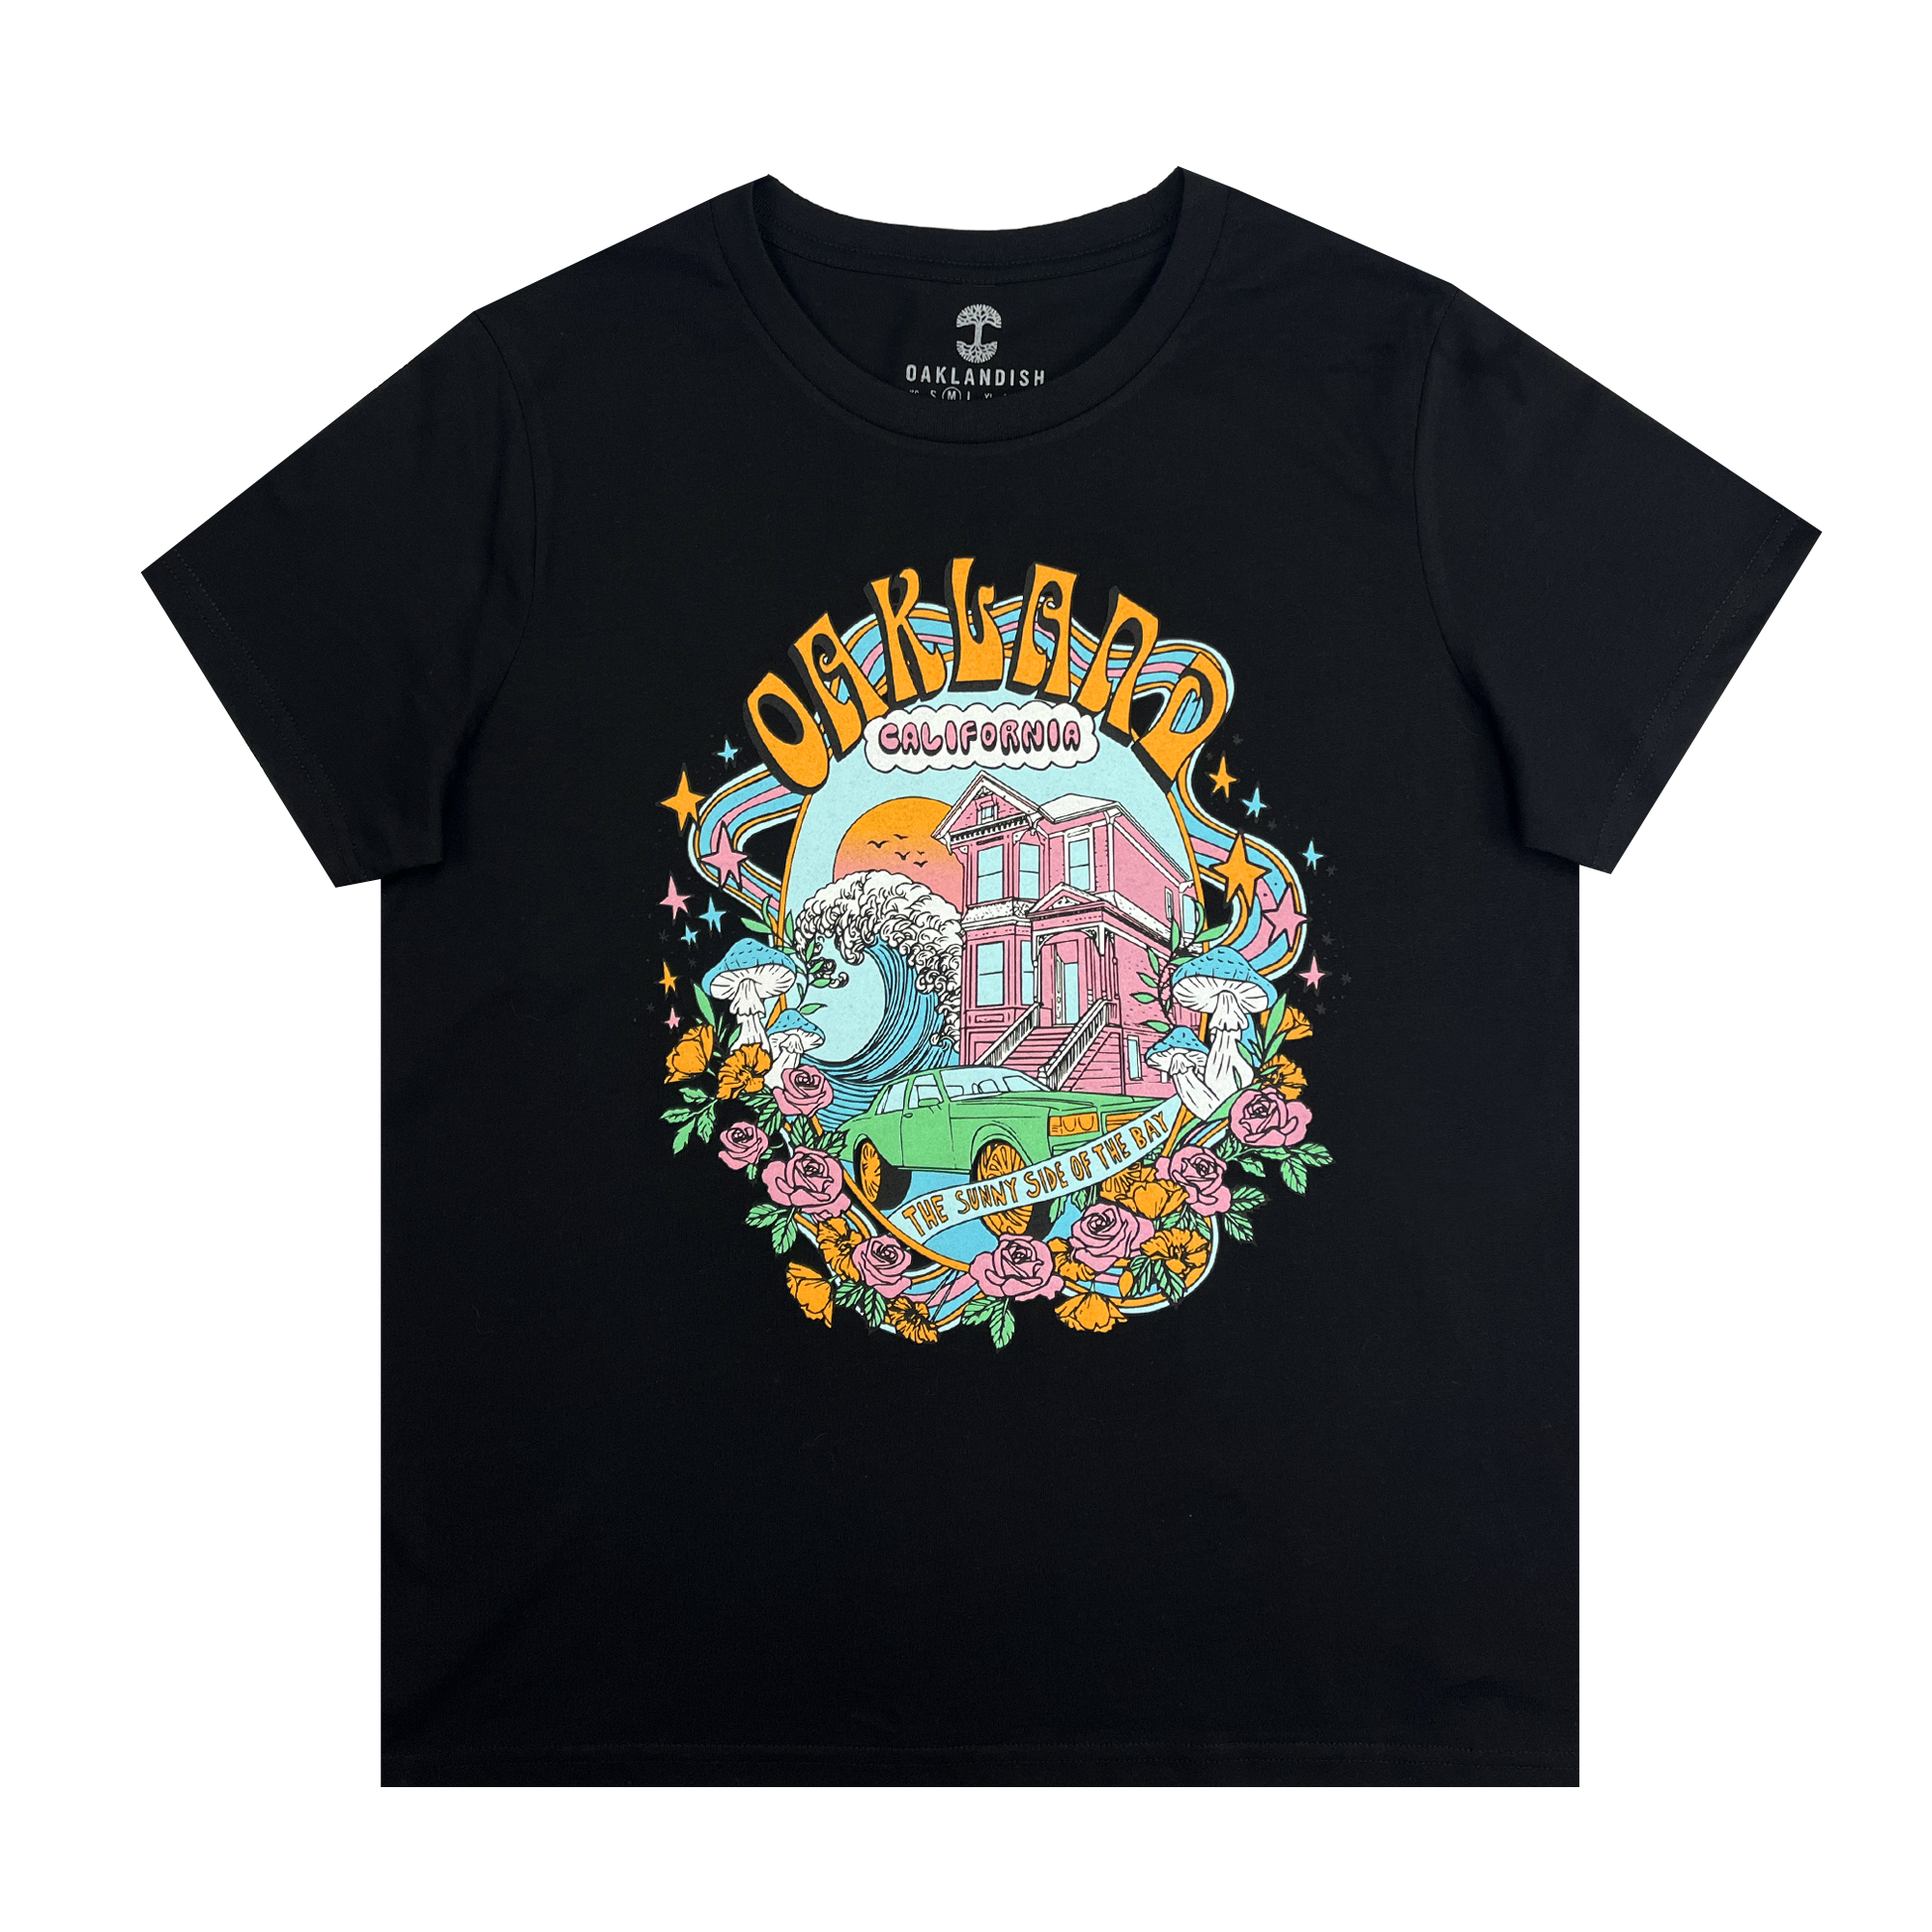 Front view of Women's black cotton t-shirt with Oakland dream design.